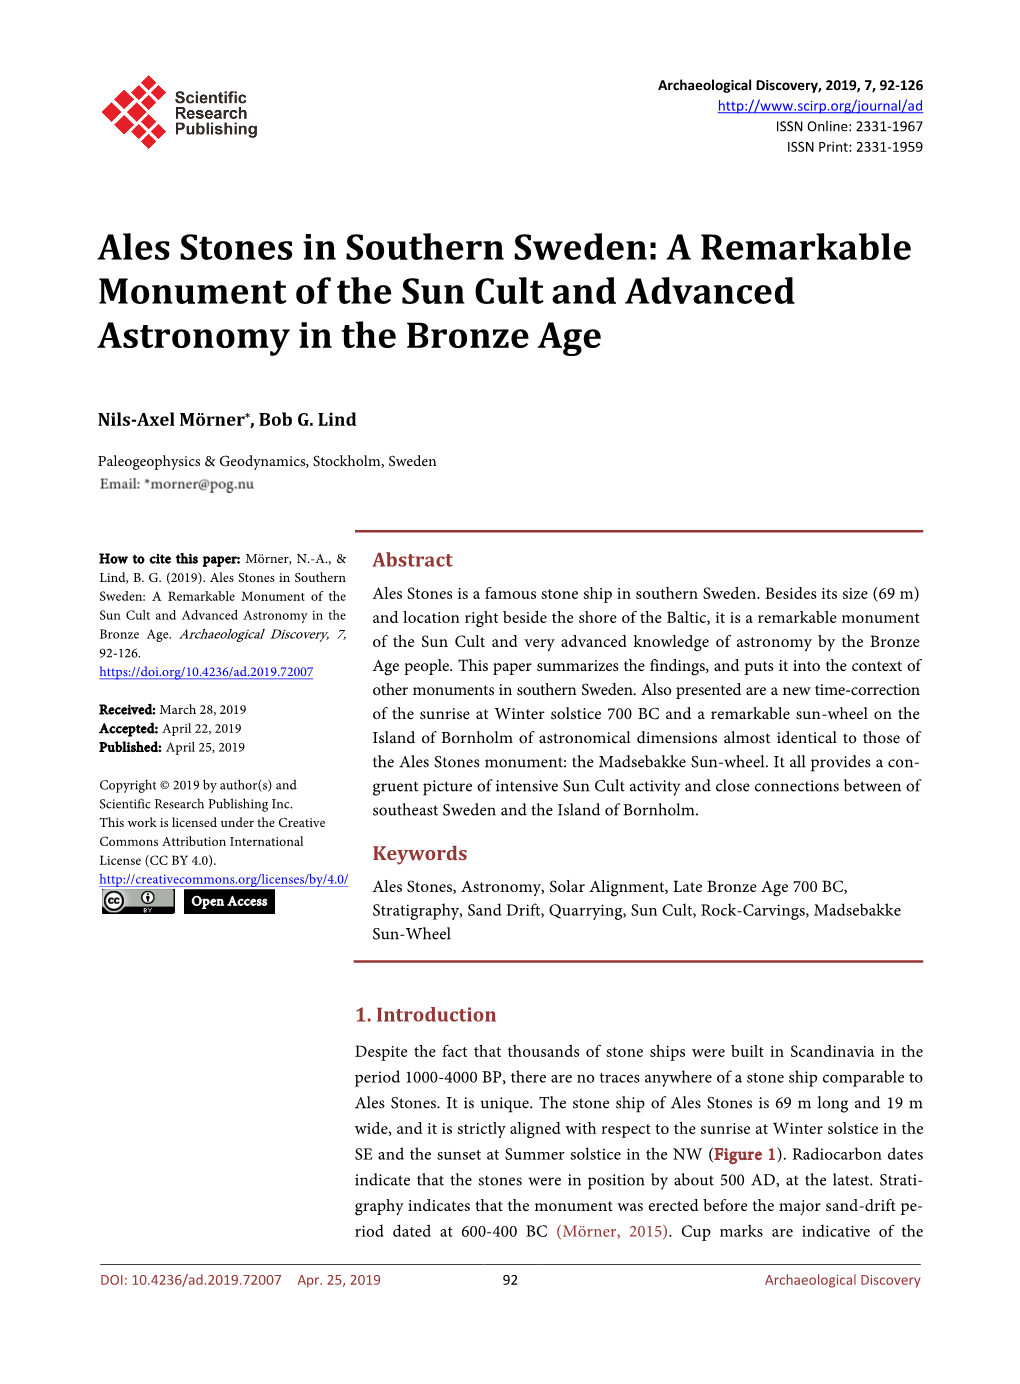 Ales Stones in Southern Sweden: a Remarkable Monument of the Sun Cult and Advanced Astronomy in the Bronze Age